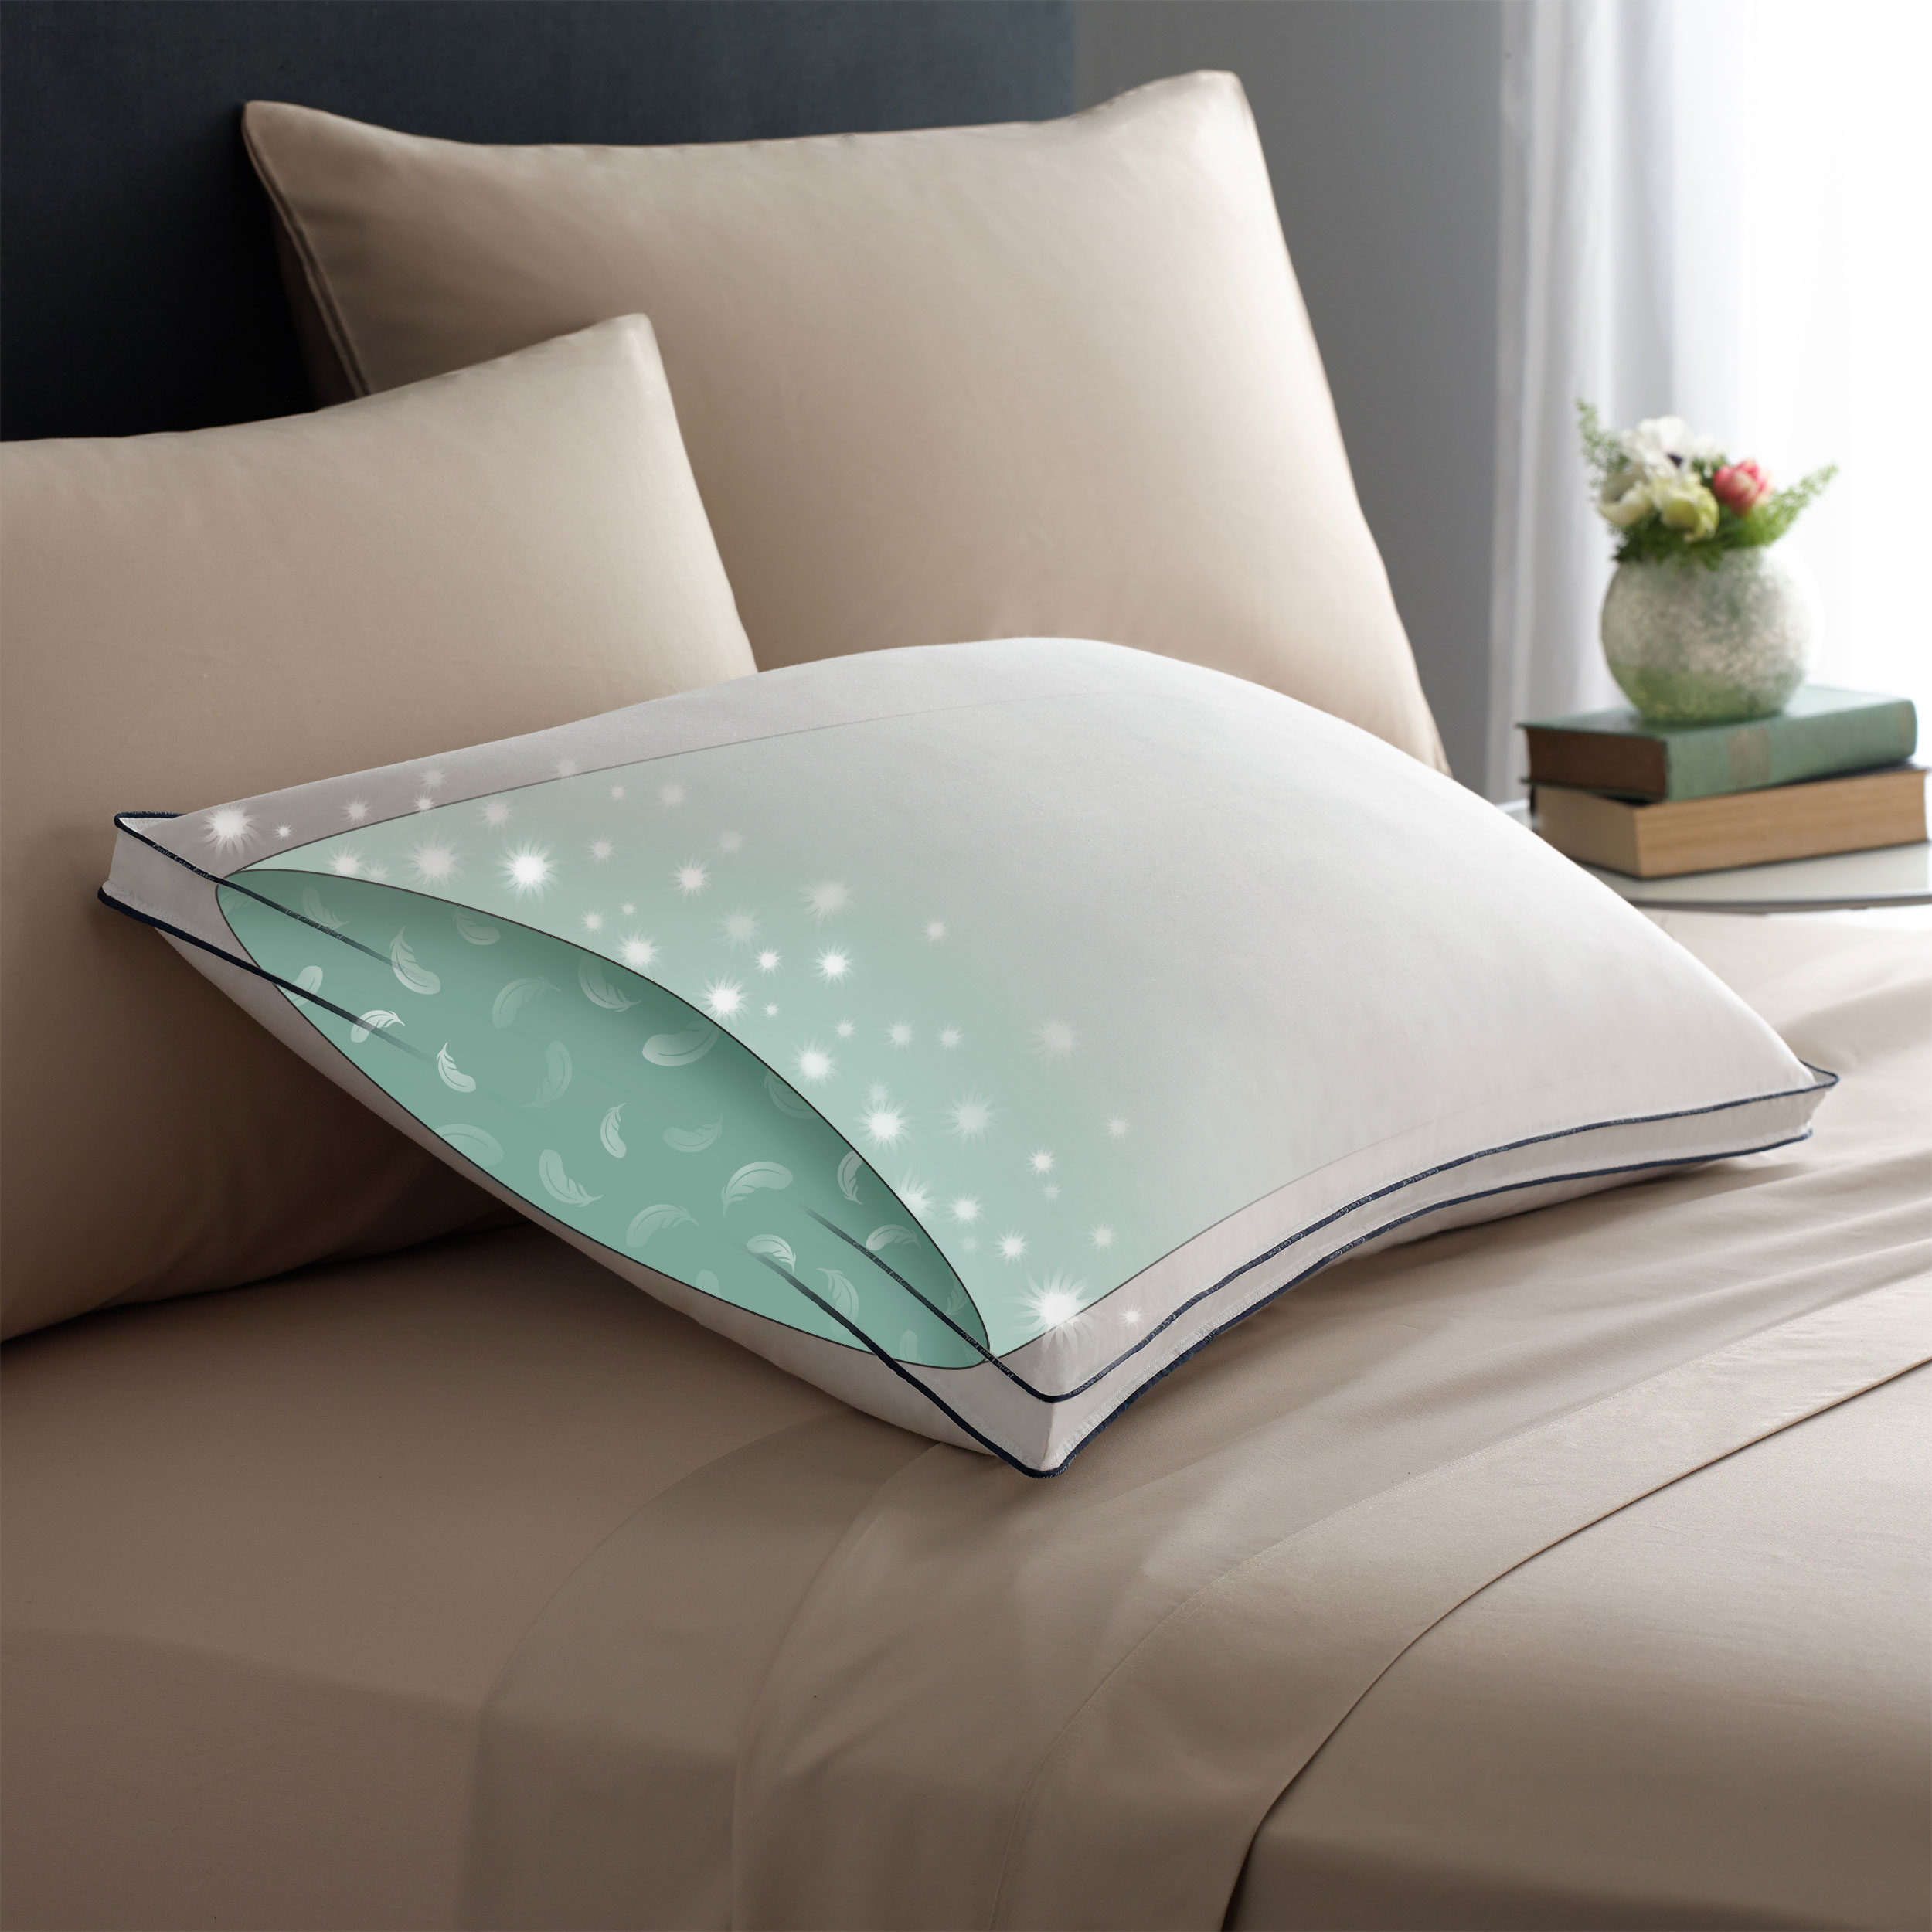 Pacific Coast Double Downaround Soft Pillow 300 Thread Count 550 Fill Power Down & Resilia Feathers - Queen